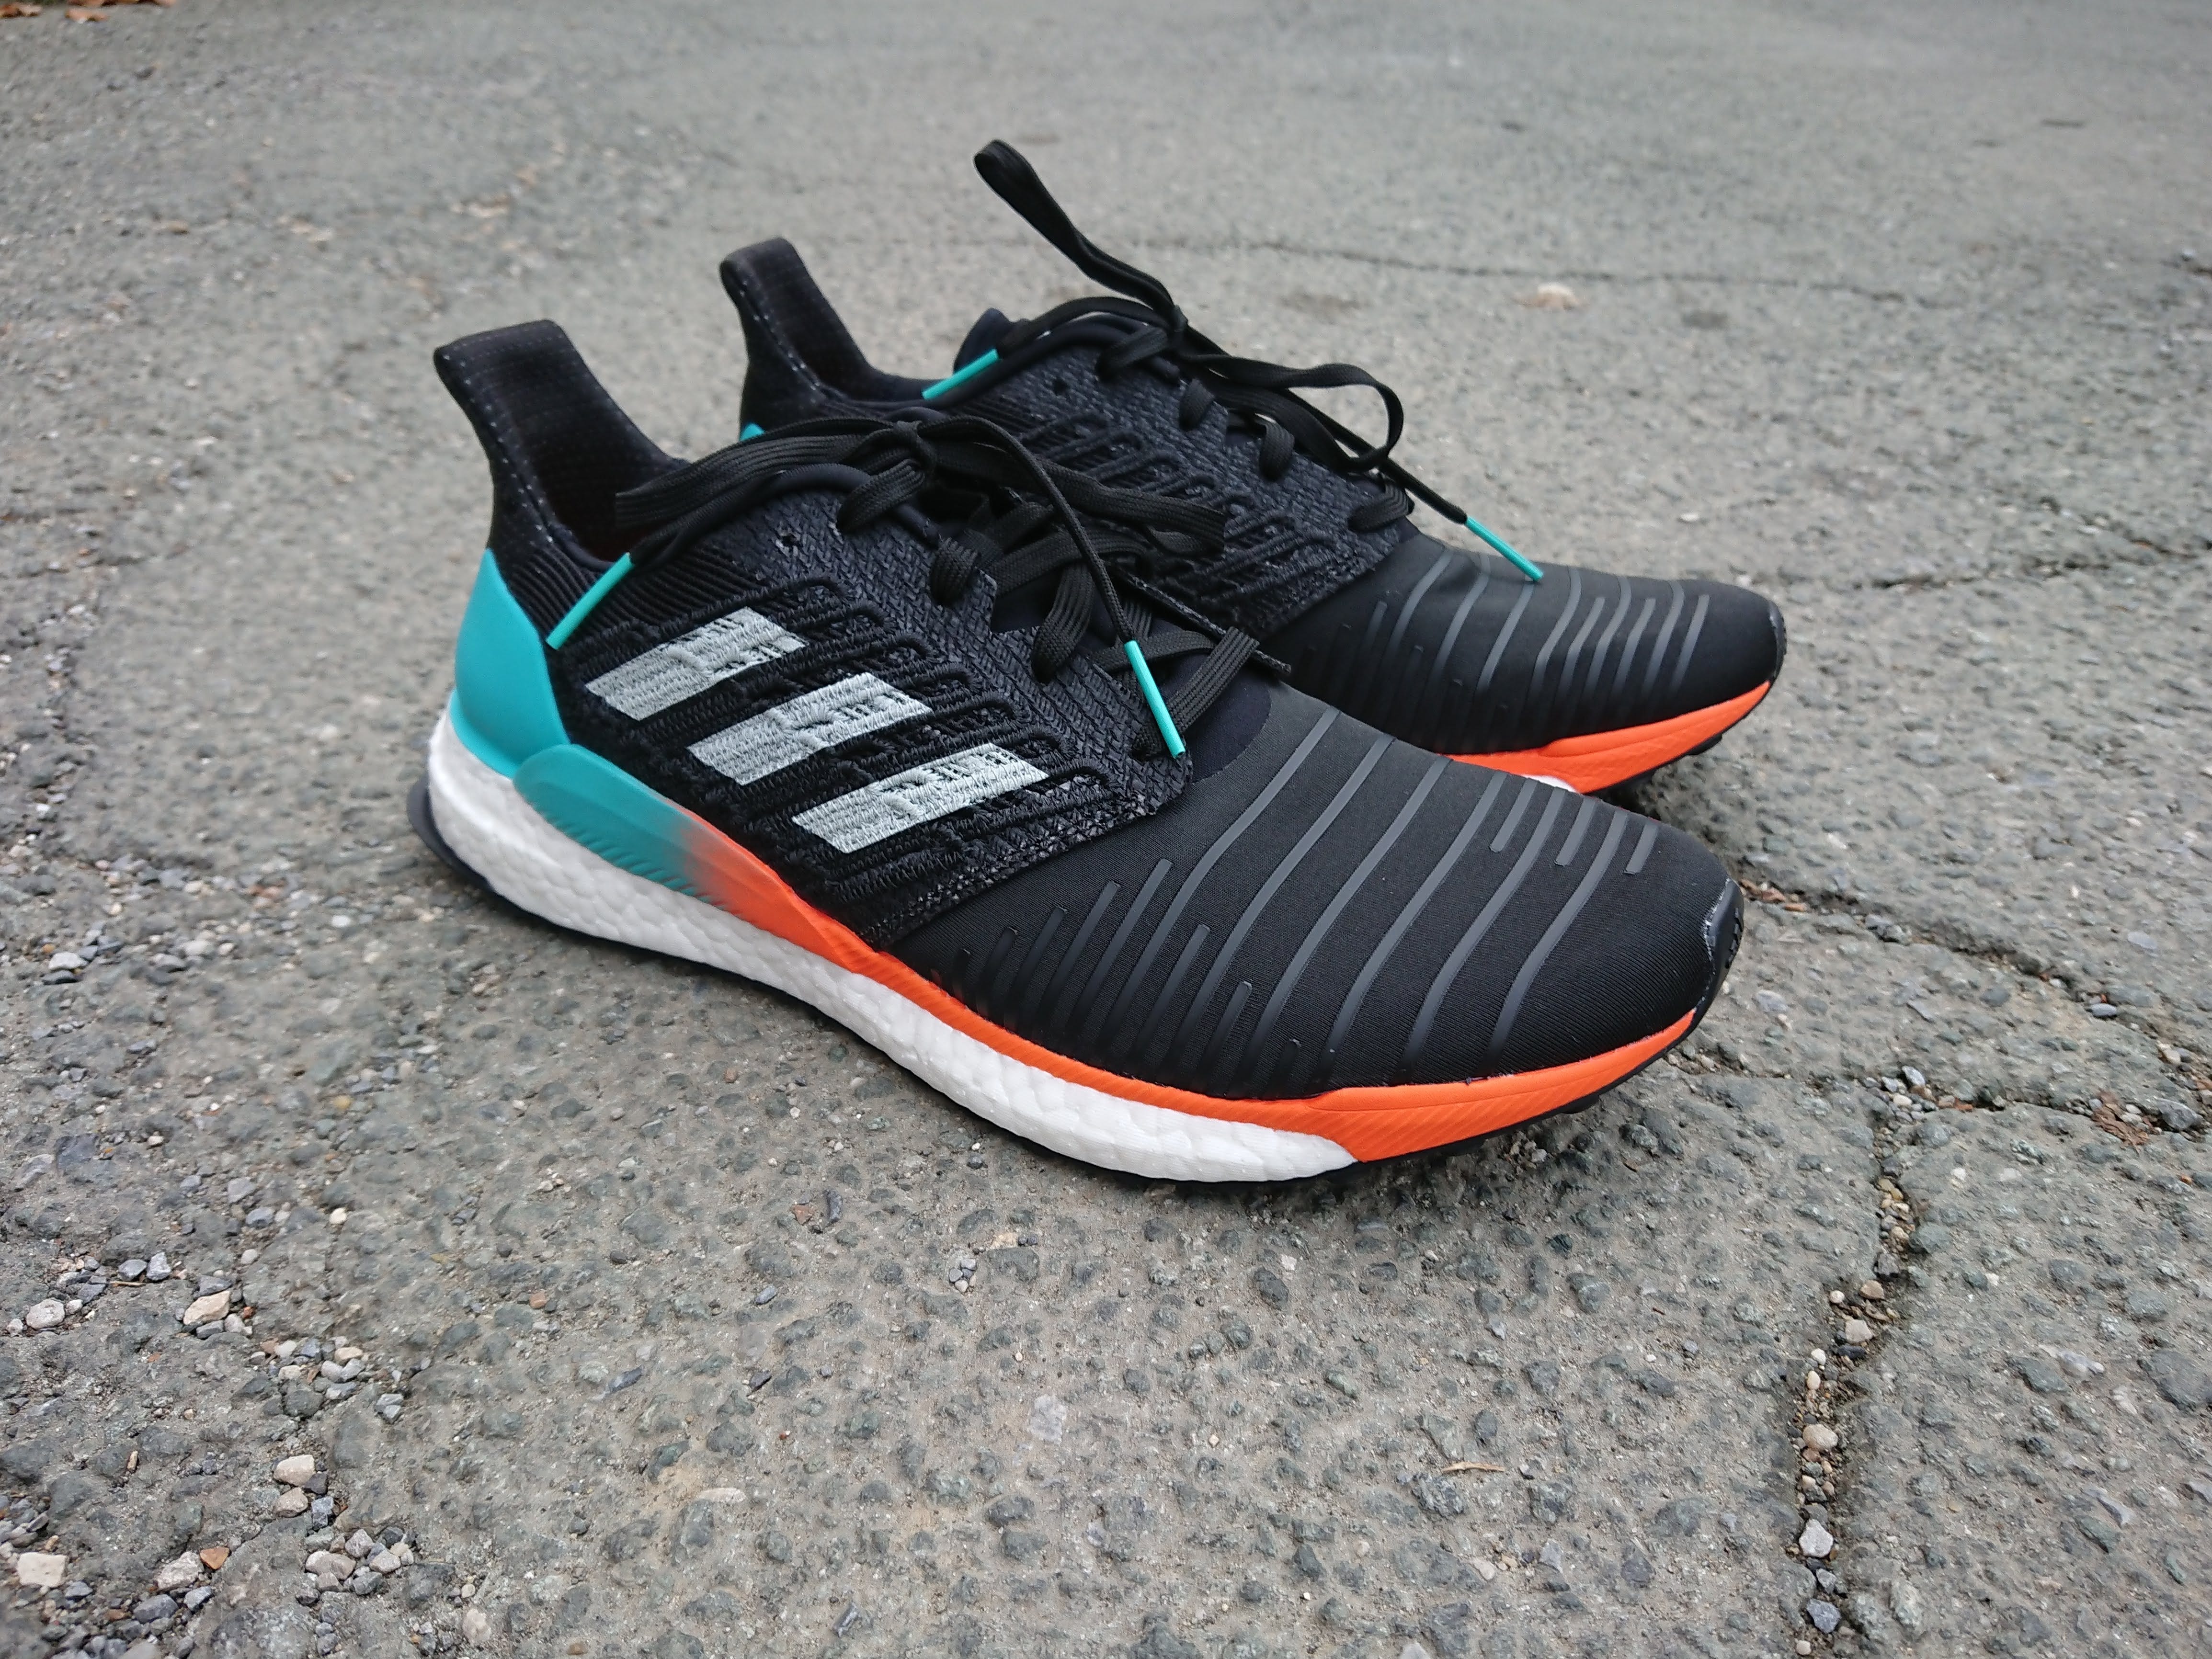 Adidas Boost Tenisice Outlet, 52% OFF | lagence.tv